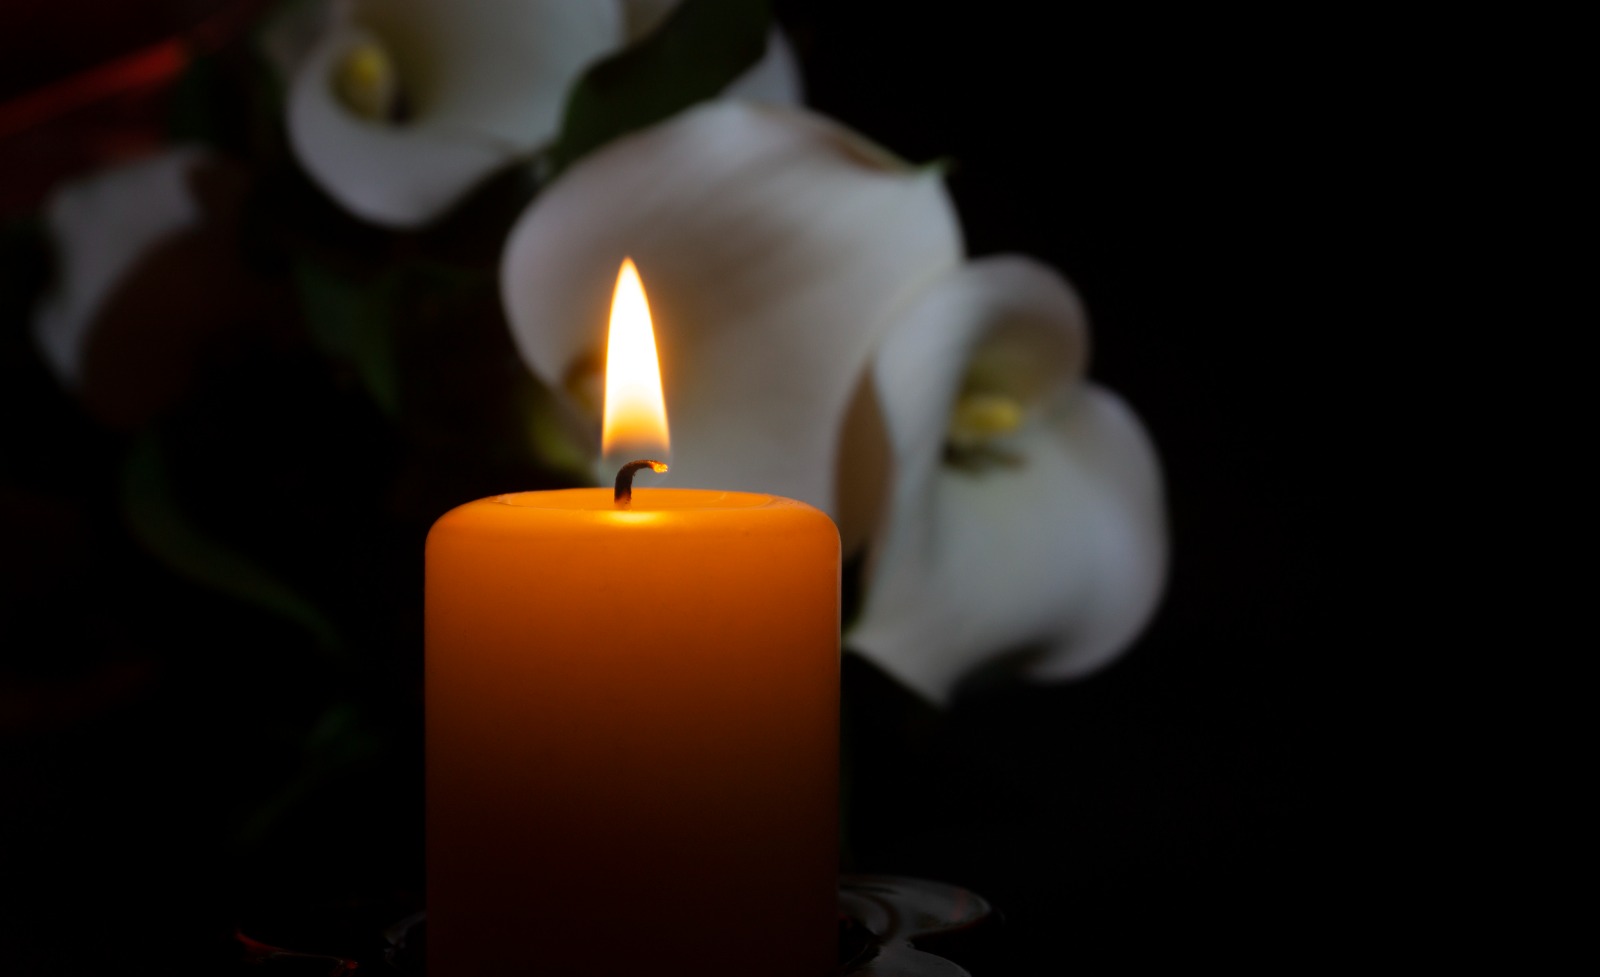 A burning candle with lilies in the background